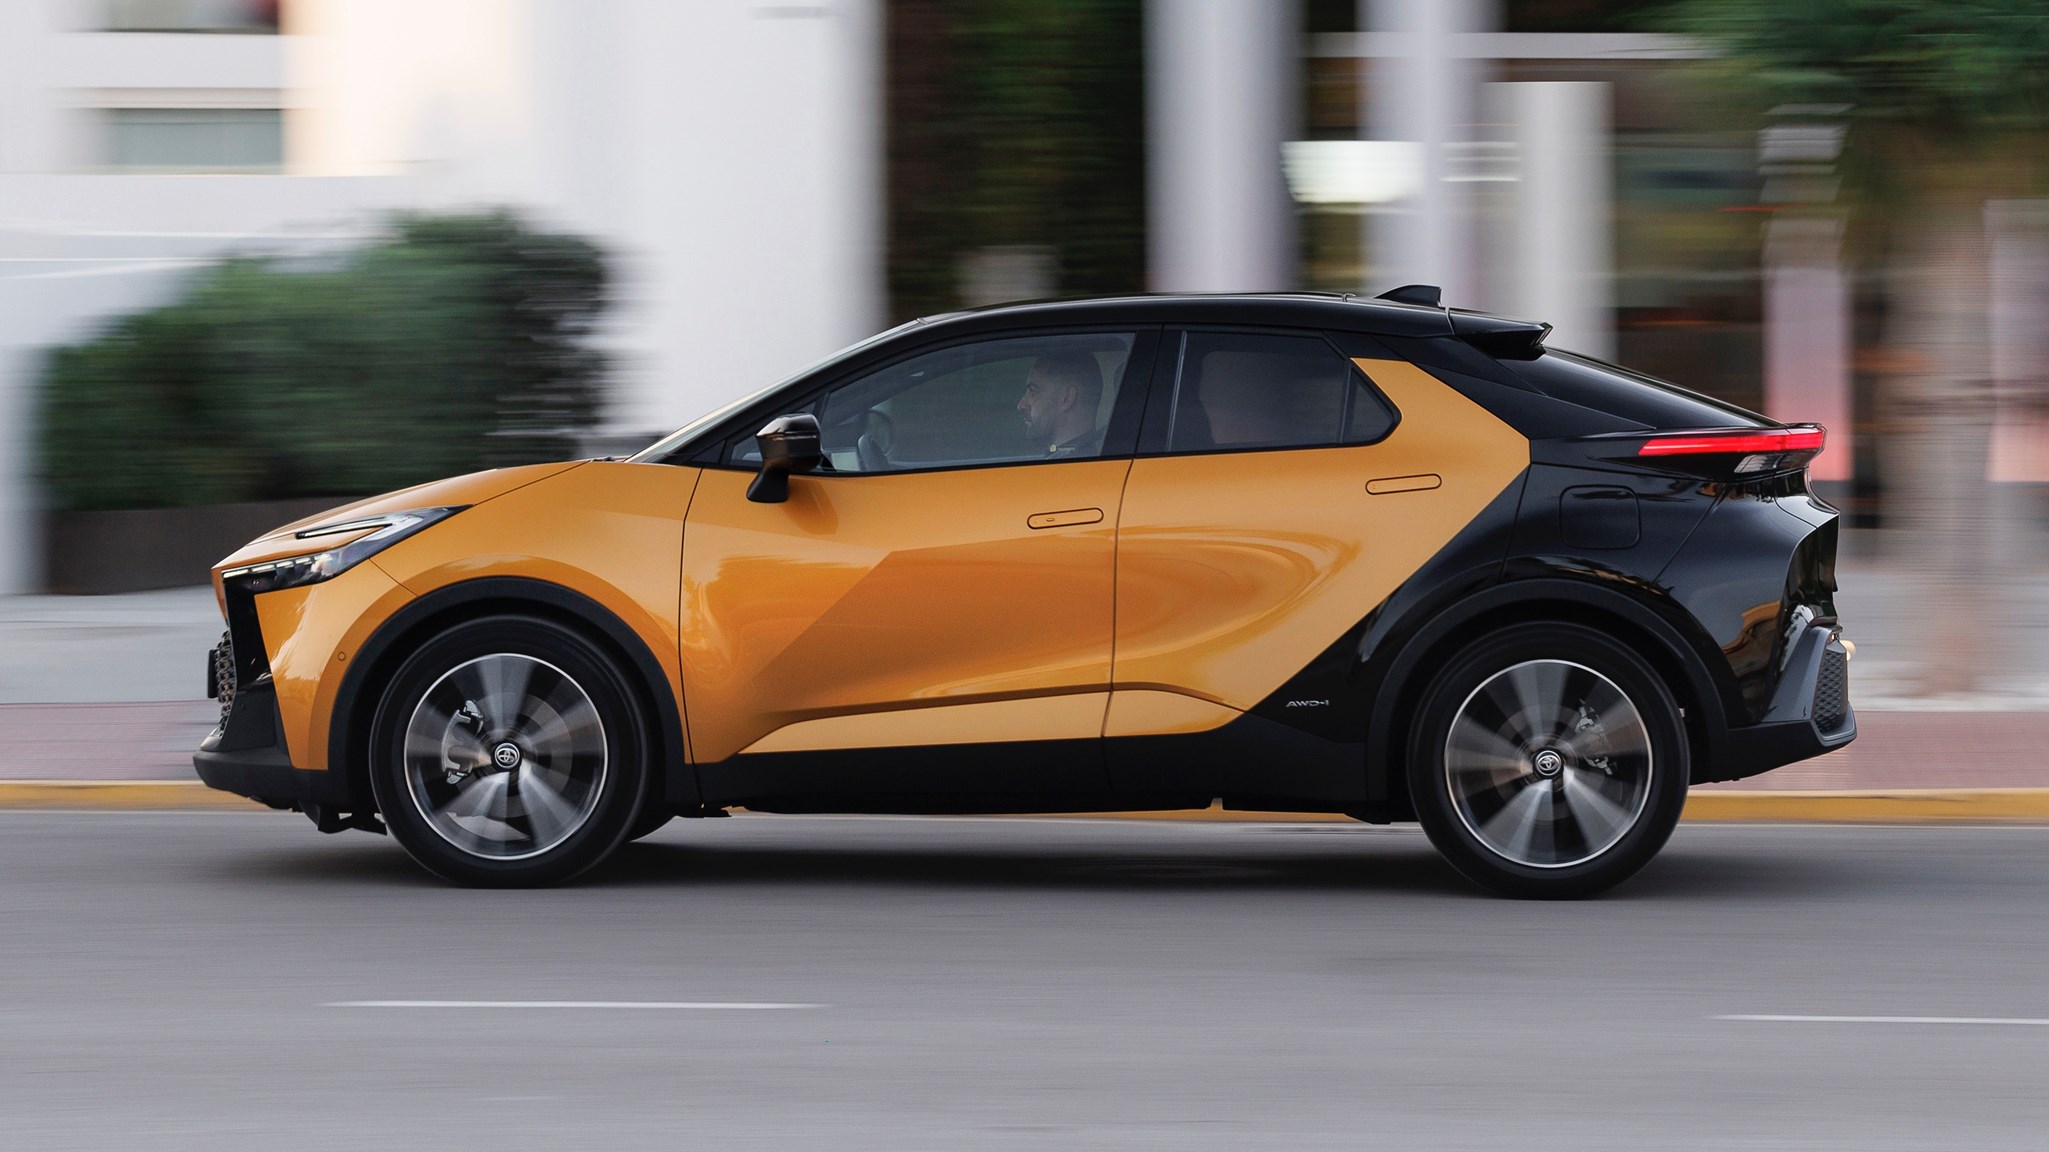 Nearly new buying guide: Toyota C-HR